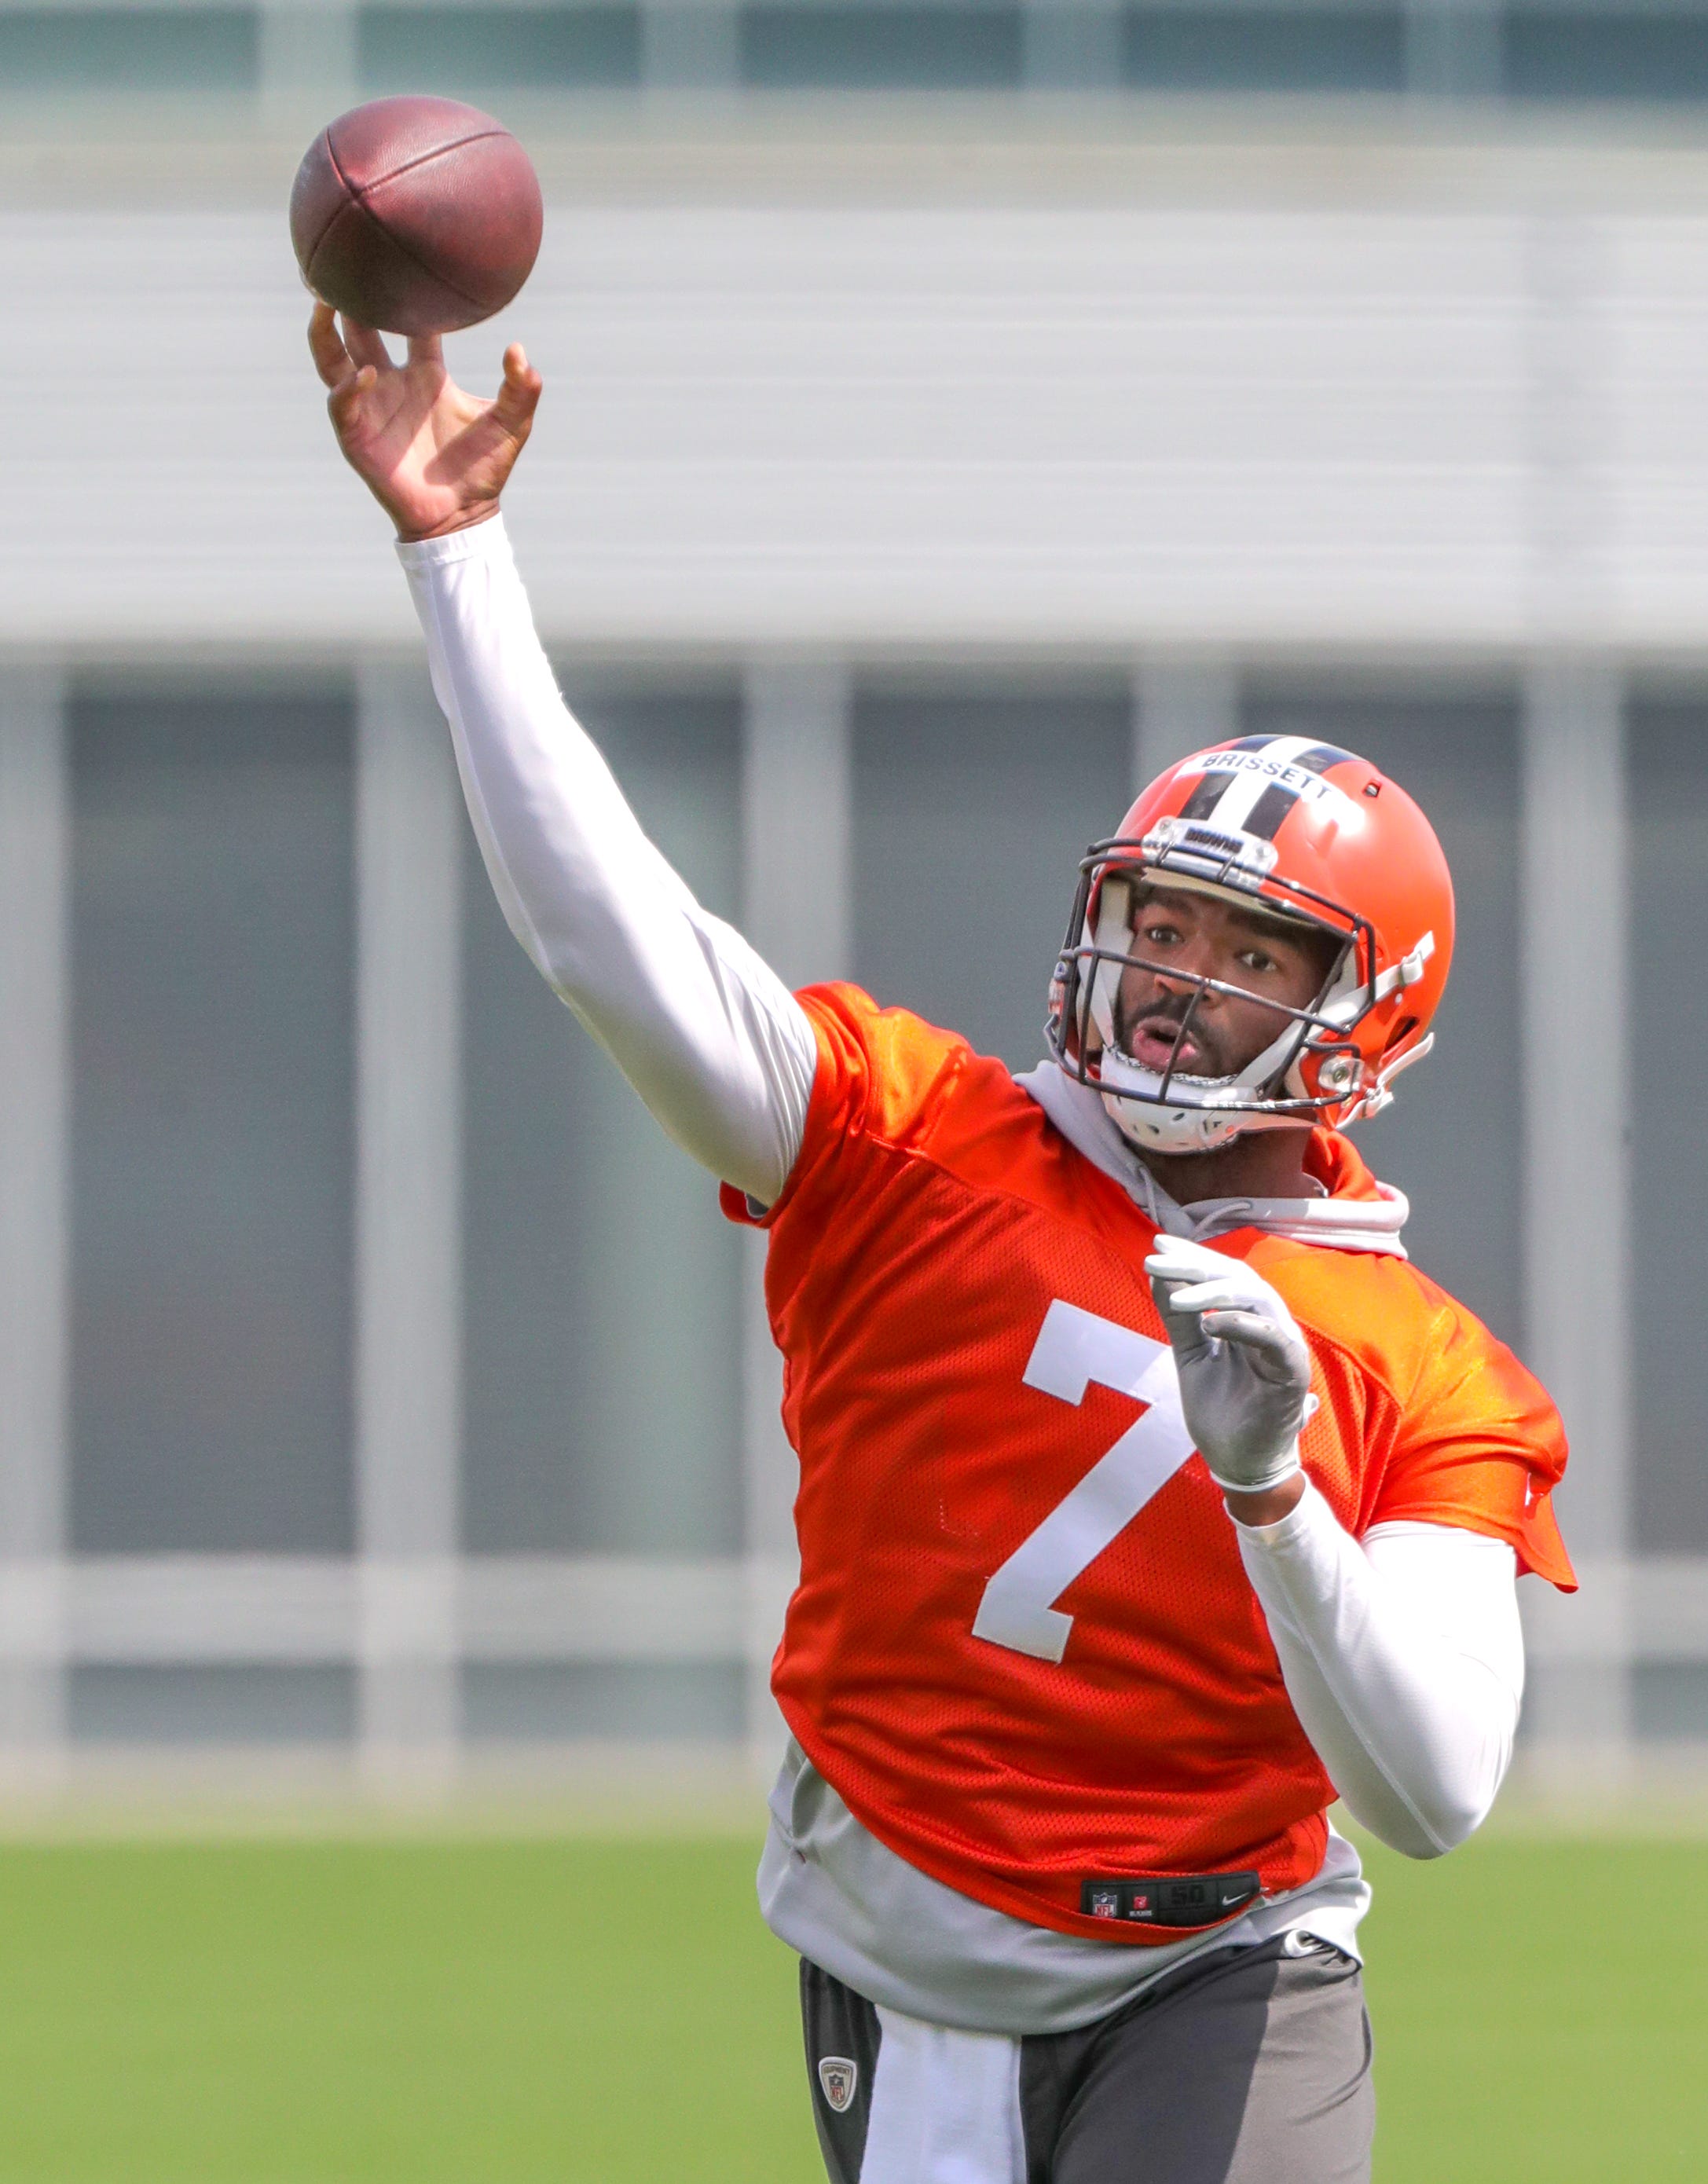 A Browns fan weighs how to think about Deshaun Watson